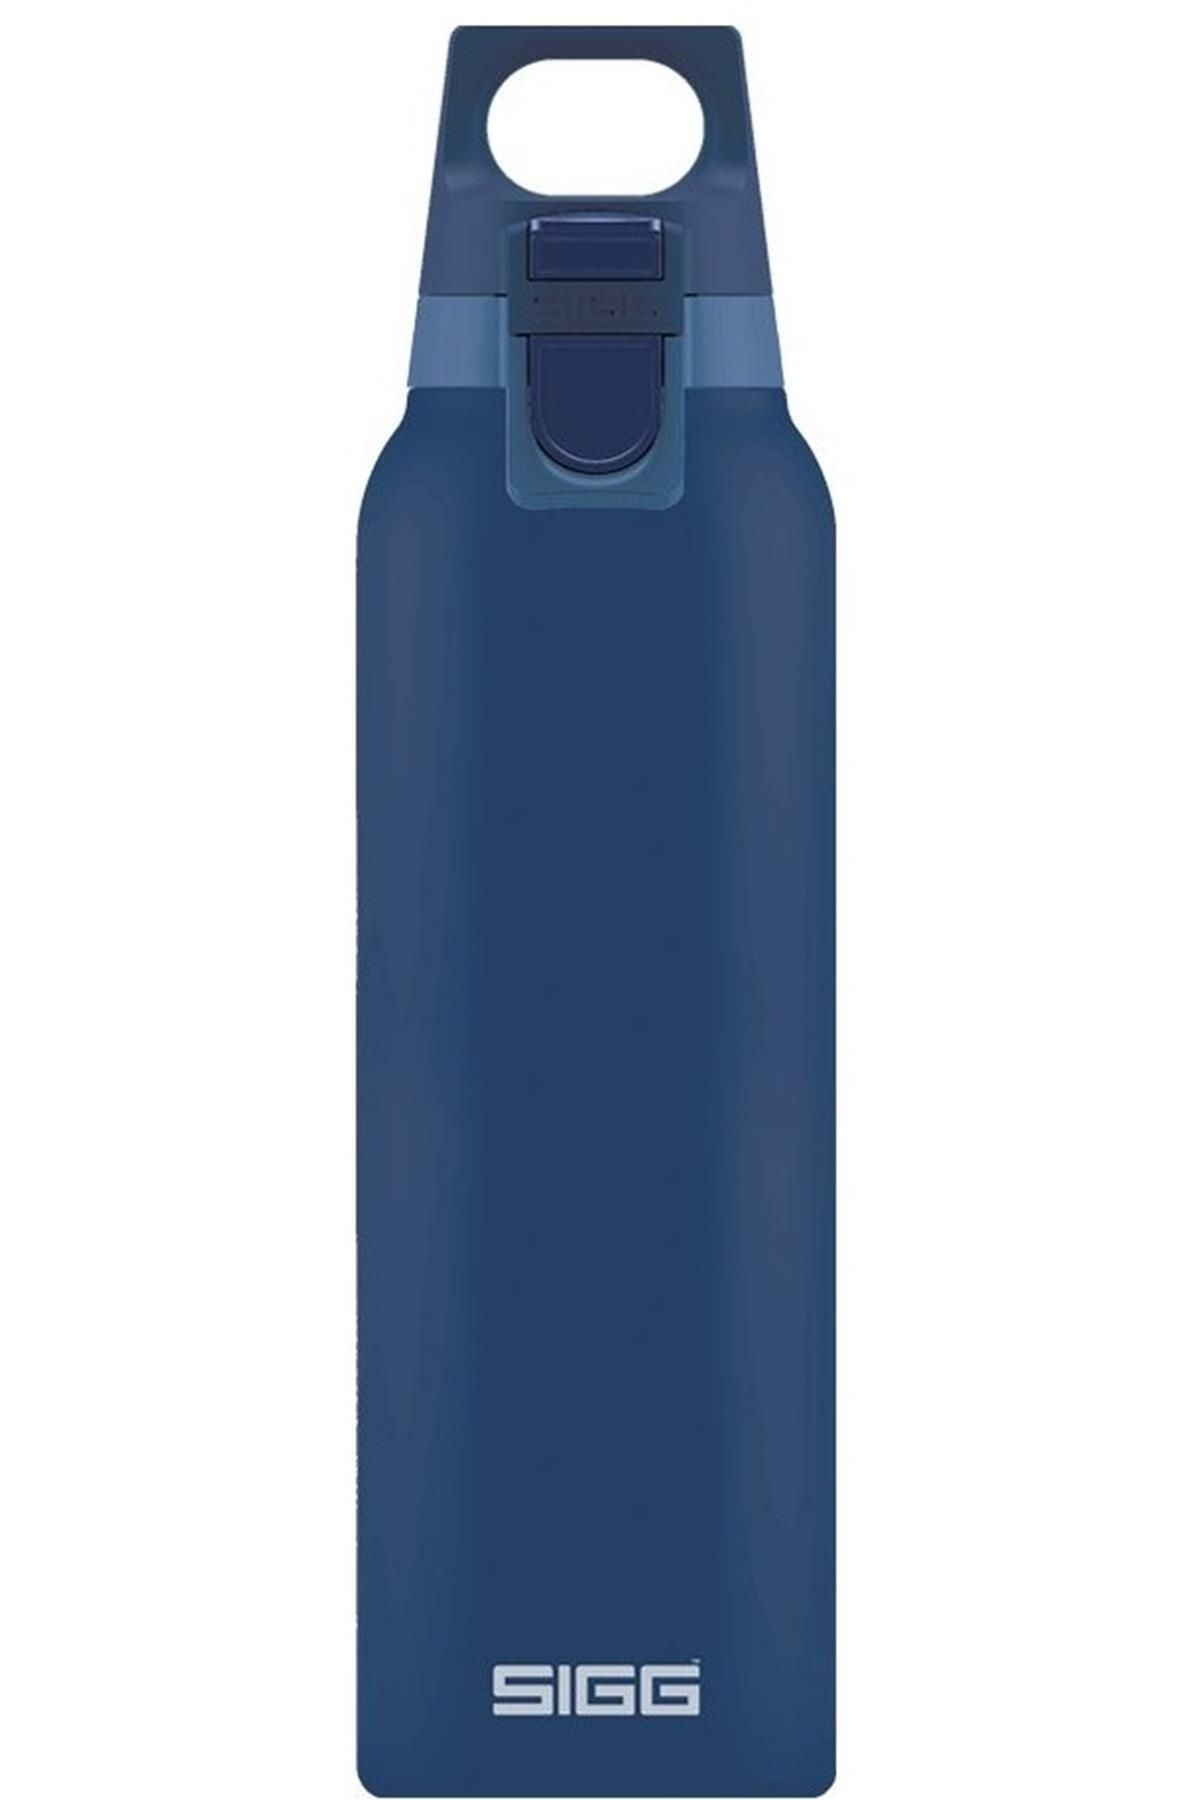 Sigg Sigg 8674.00 Thermo Flask Hot&Cold One 0.5 Lt Termos